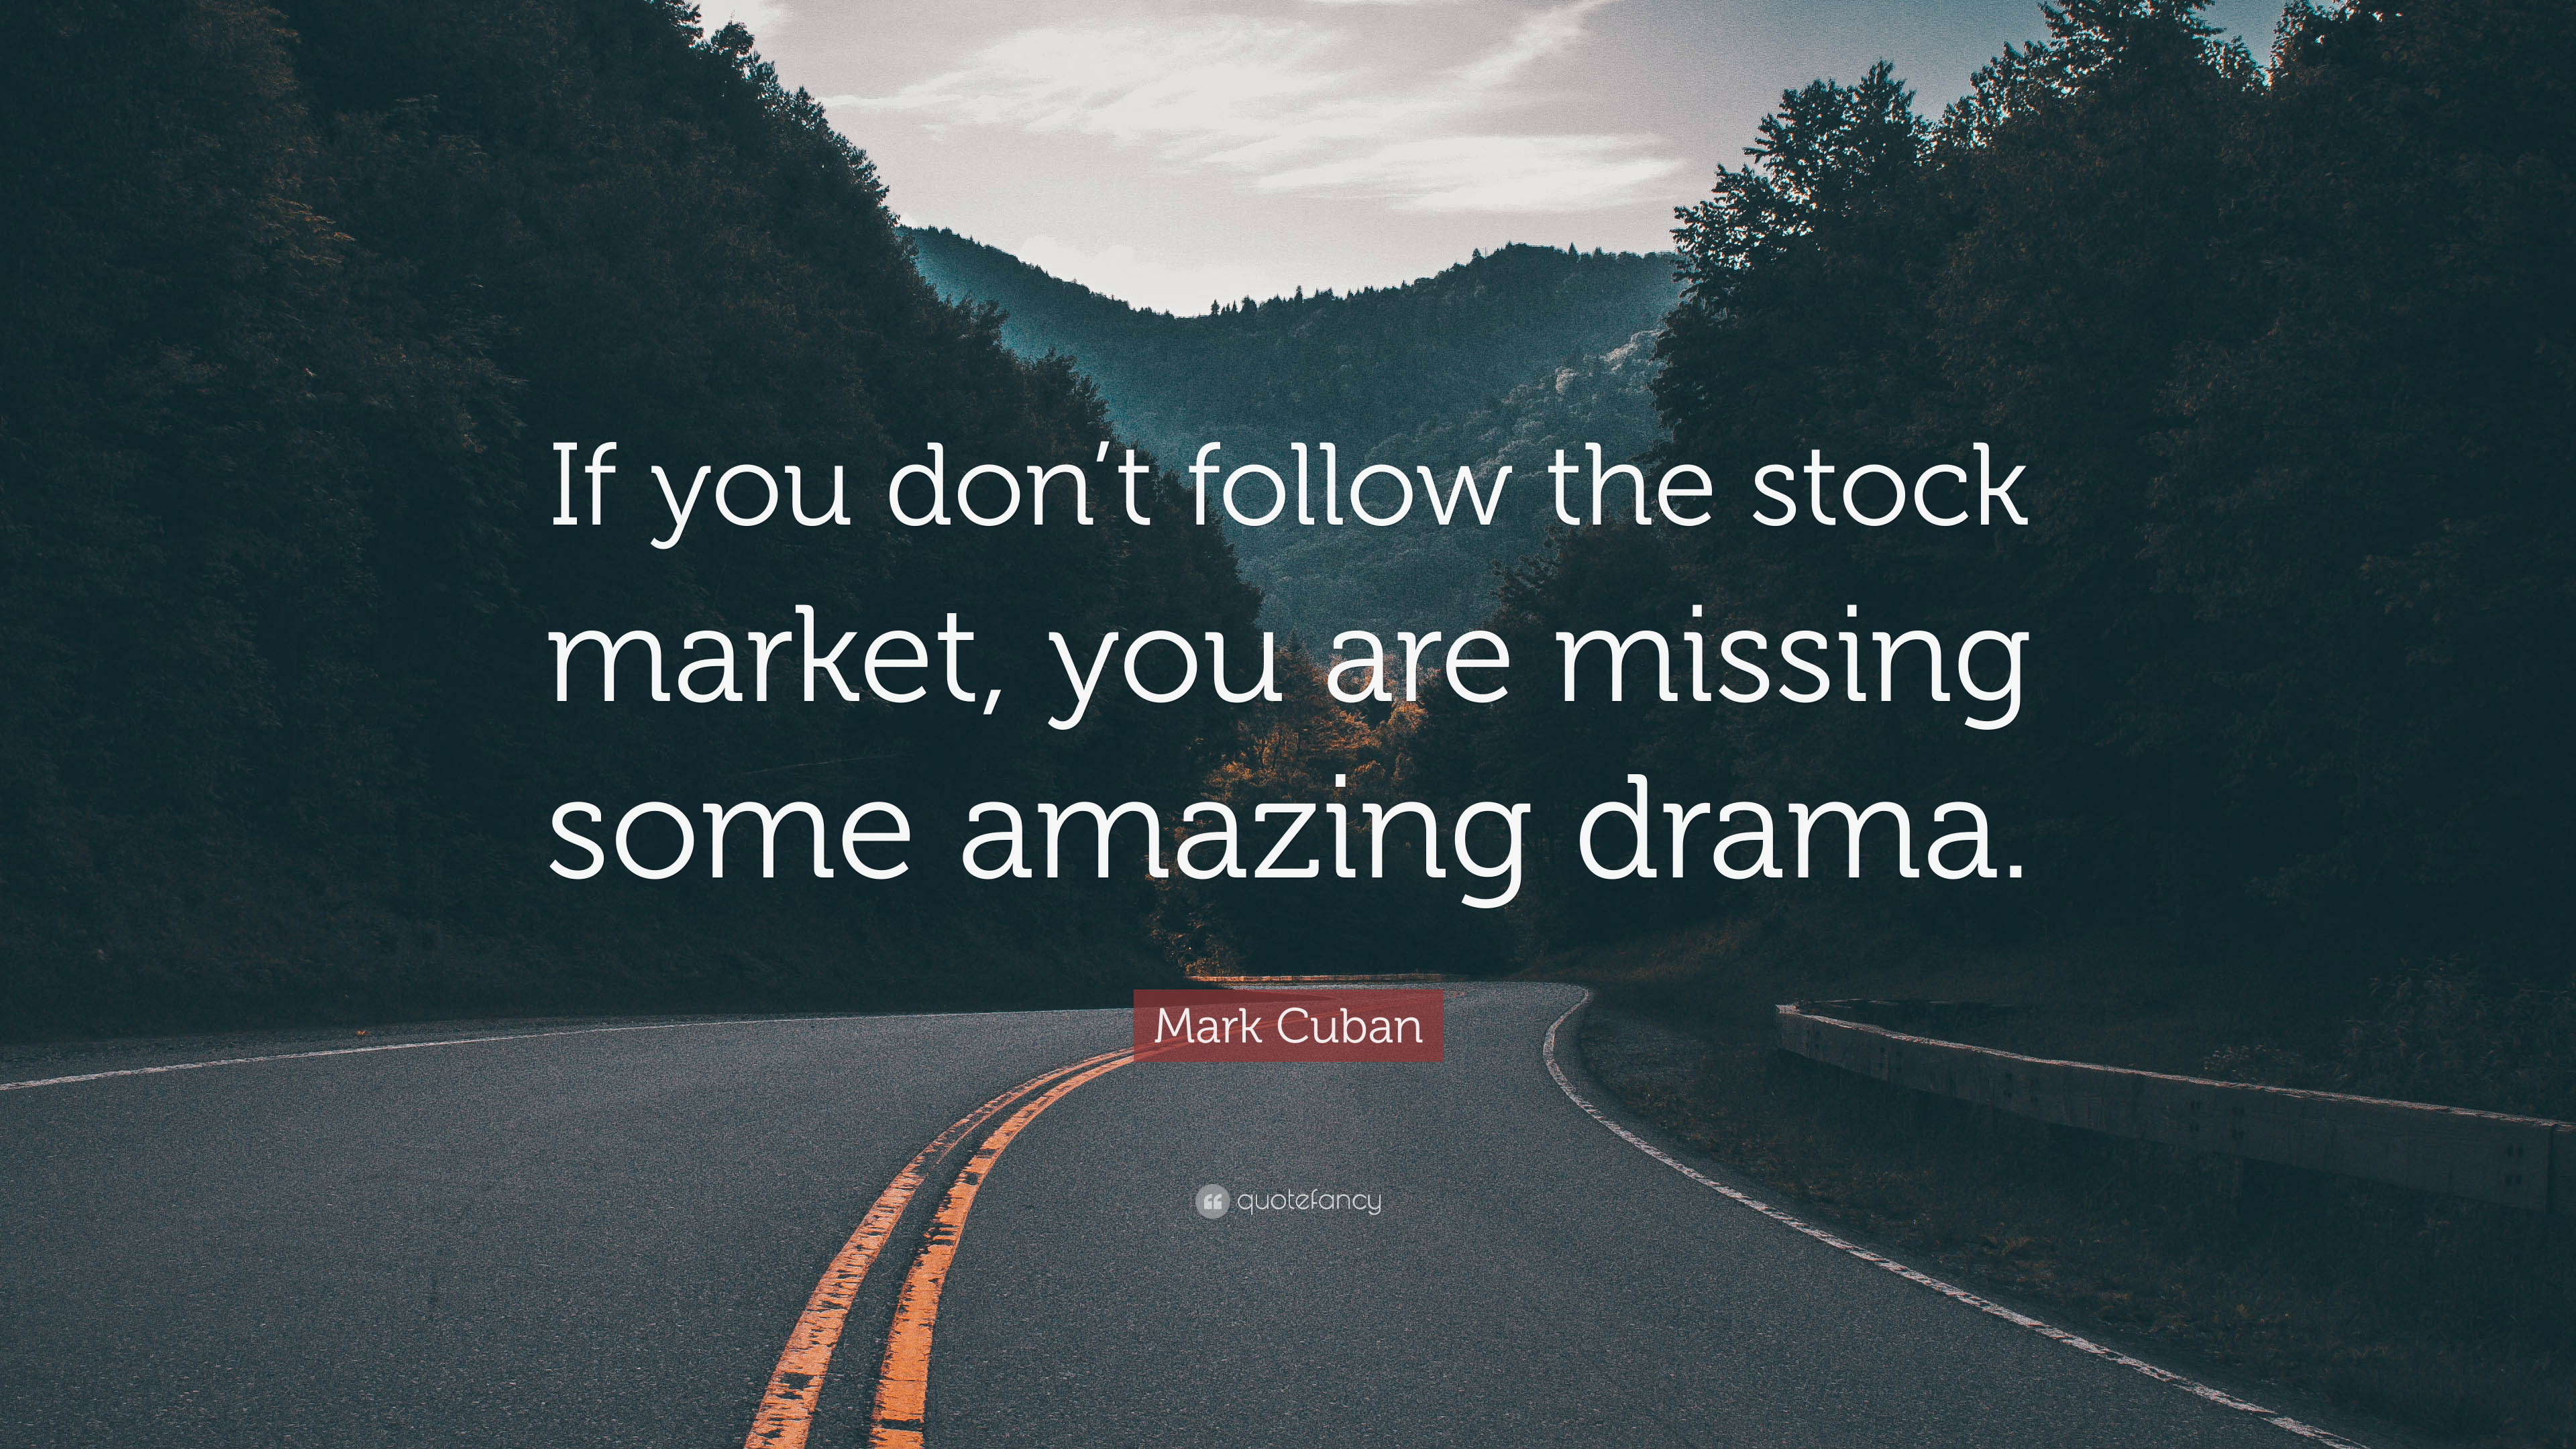 Mark Cuban Quote: “If you don't follow the stock market, you are missing some amazing drama.” (7 wallpaper)